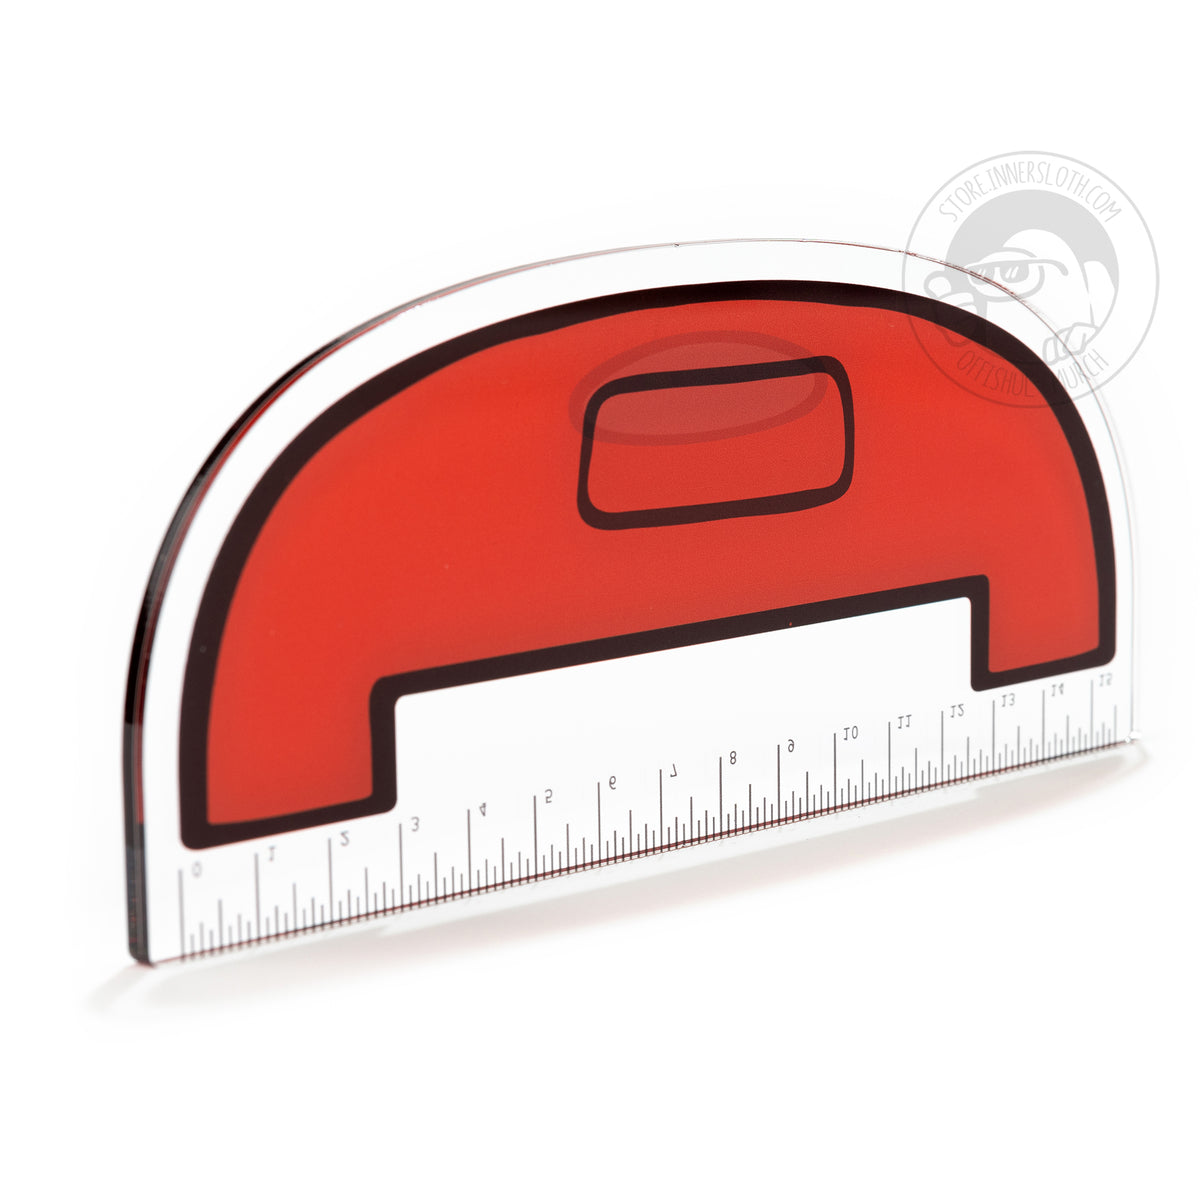 A product of the back of a ruler that is shaped like a long semi-circle. The back of the straight edge shows the mirrored measurements in inches, as the ruler is clear acrylic. The wide, red crewmate has its backpack outlined in black.